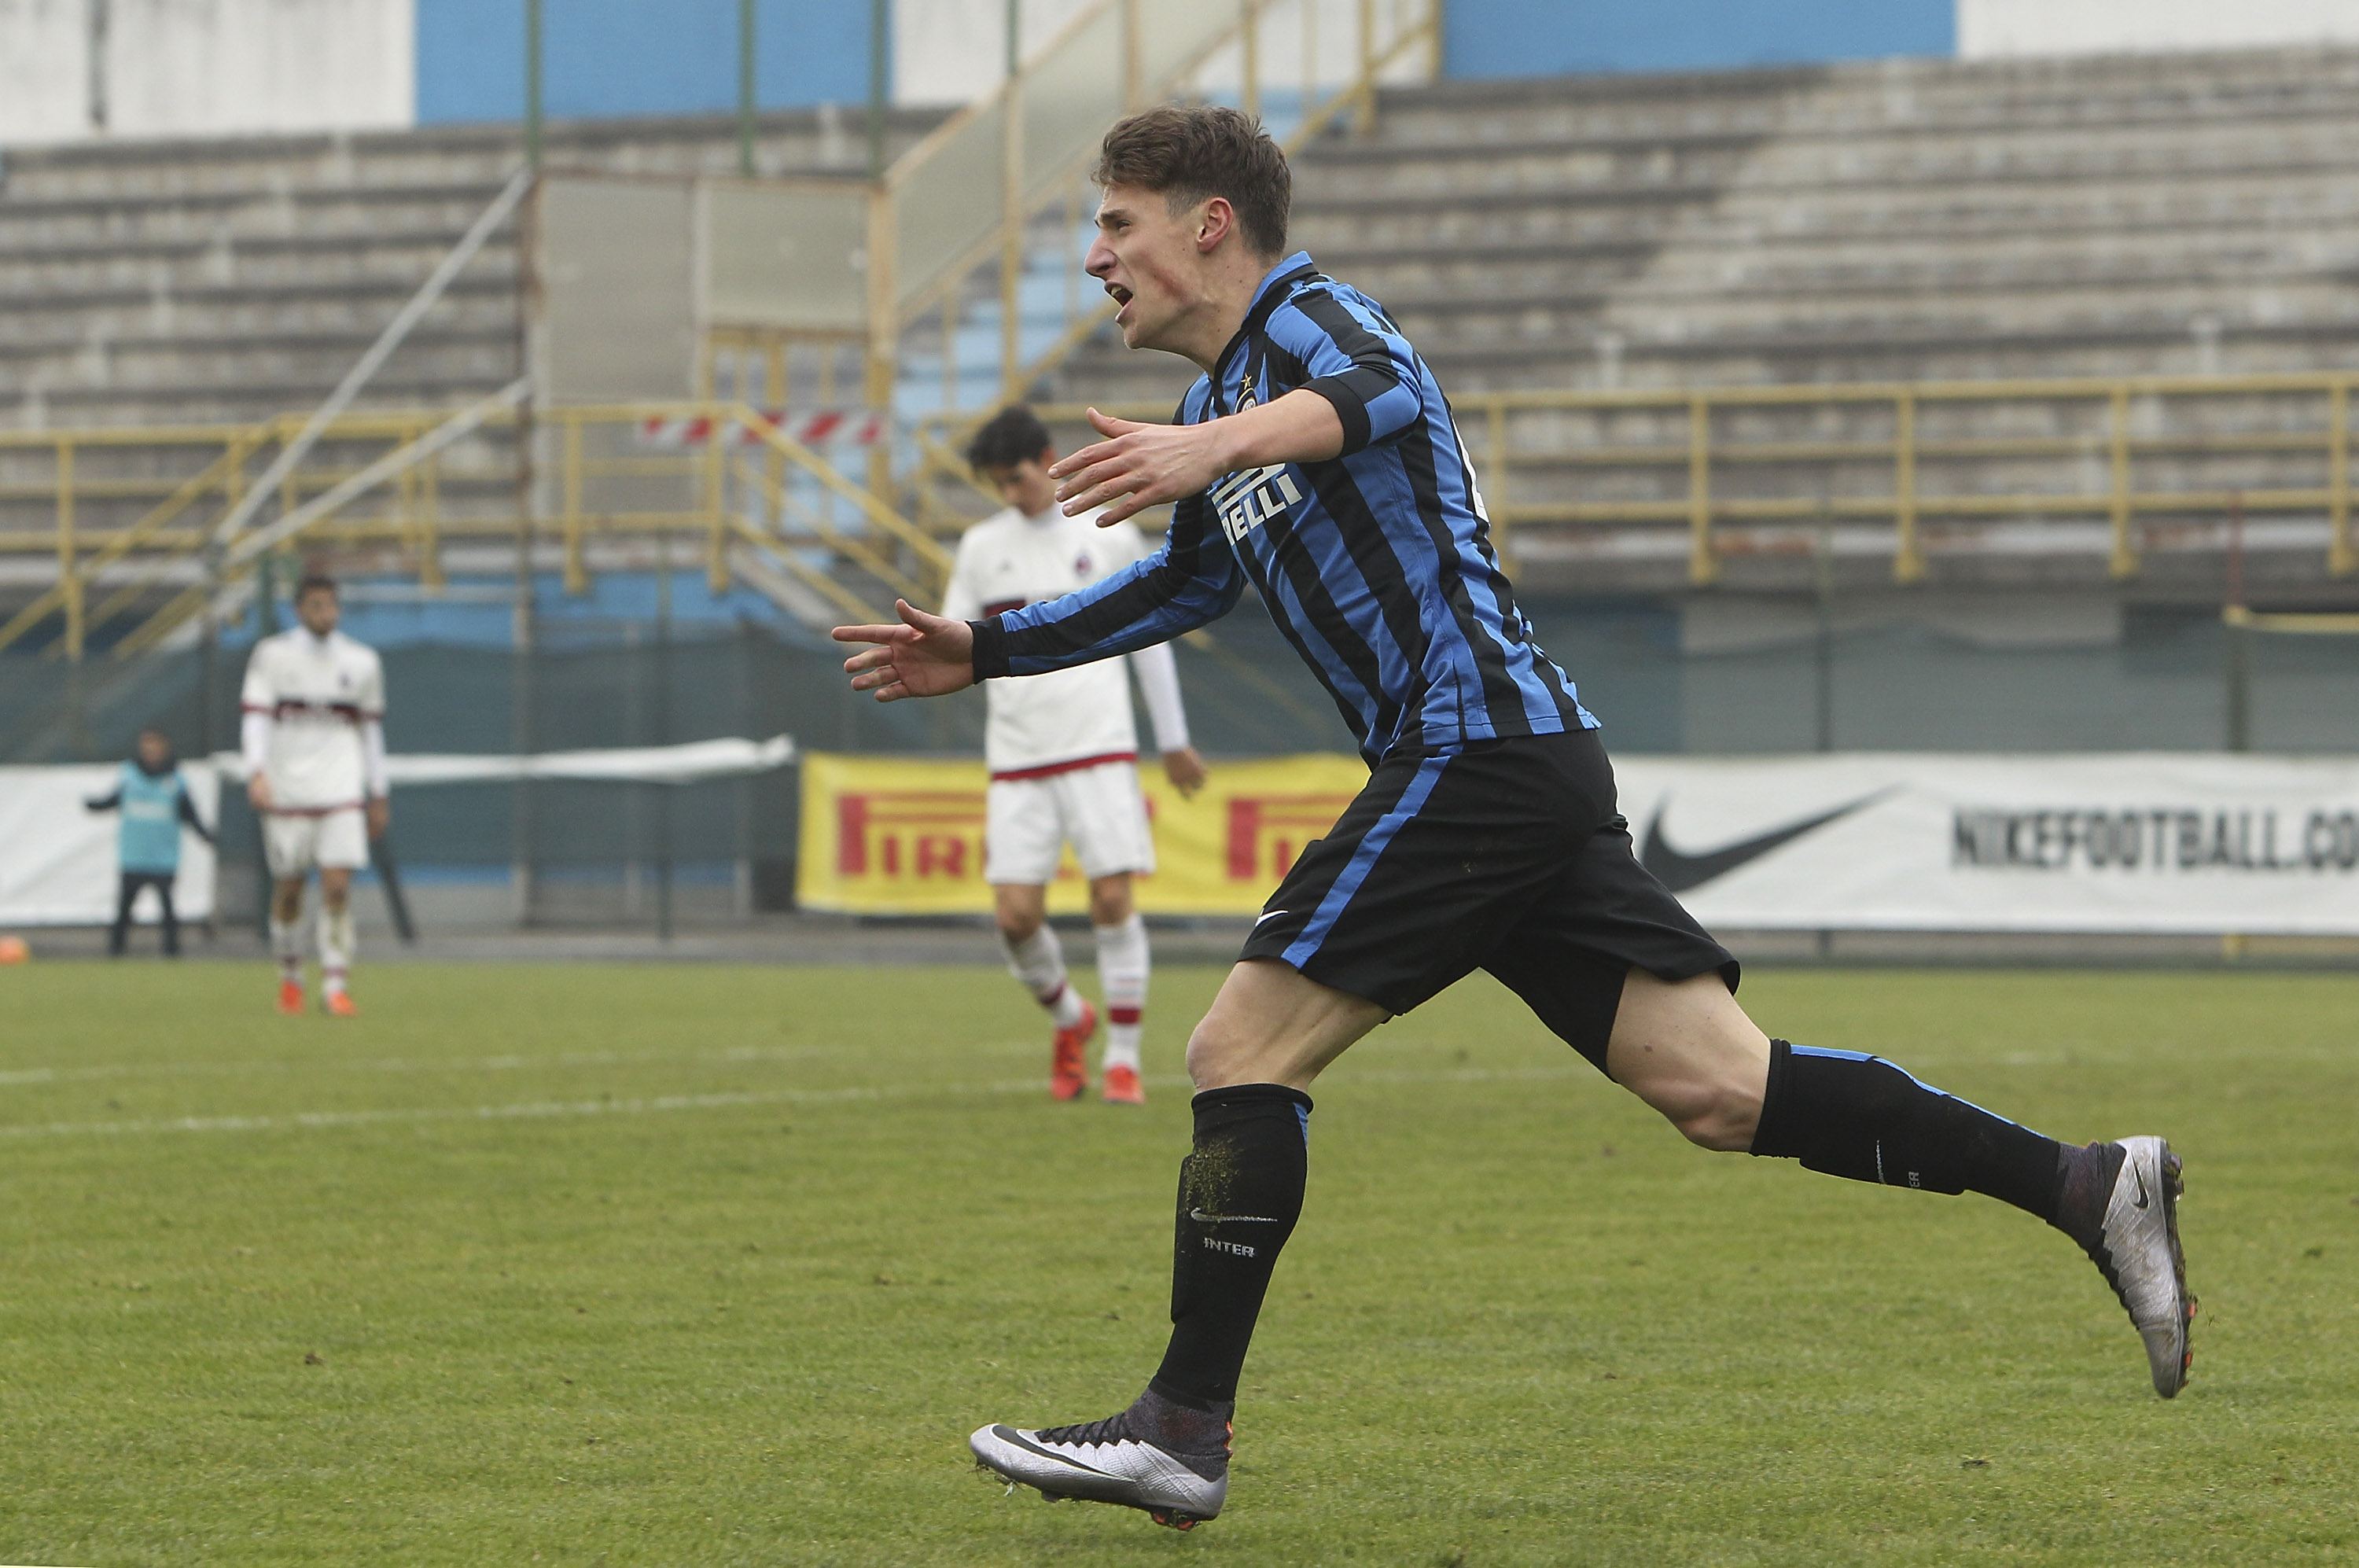 SESTO SAN GIOVANNI, ITALY - DECEMBER 13:  Andrea Pinamonti (C) of FC Internazionale Milano celebrates his goal during the juvenile match between FC Internazionale and AC Milan at Stadio Breda on December 13, 2015 in Sesto San Giovanni, Italy.  (Photo by Marco Luzzani - Inter/Inter via Getty Images)